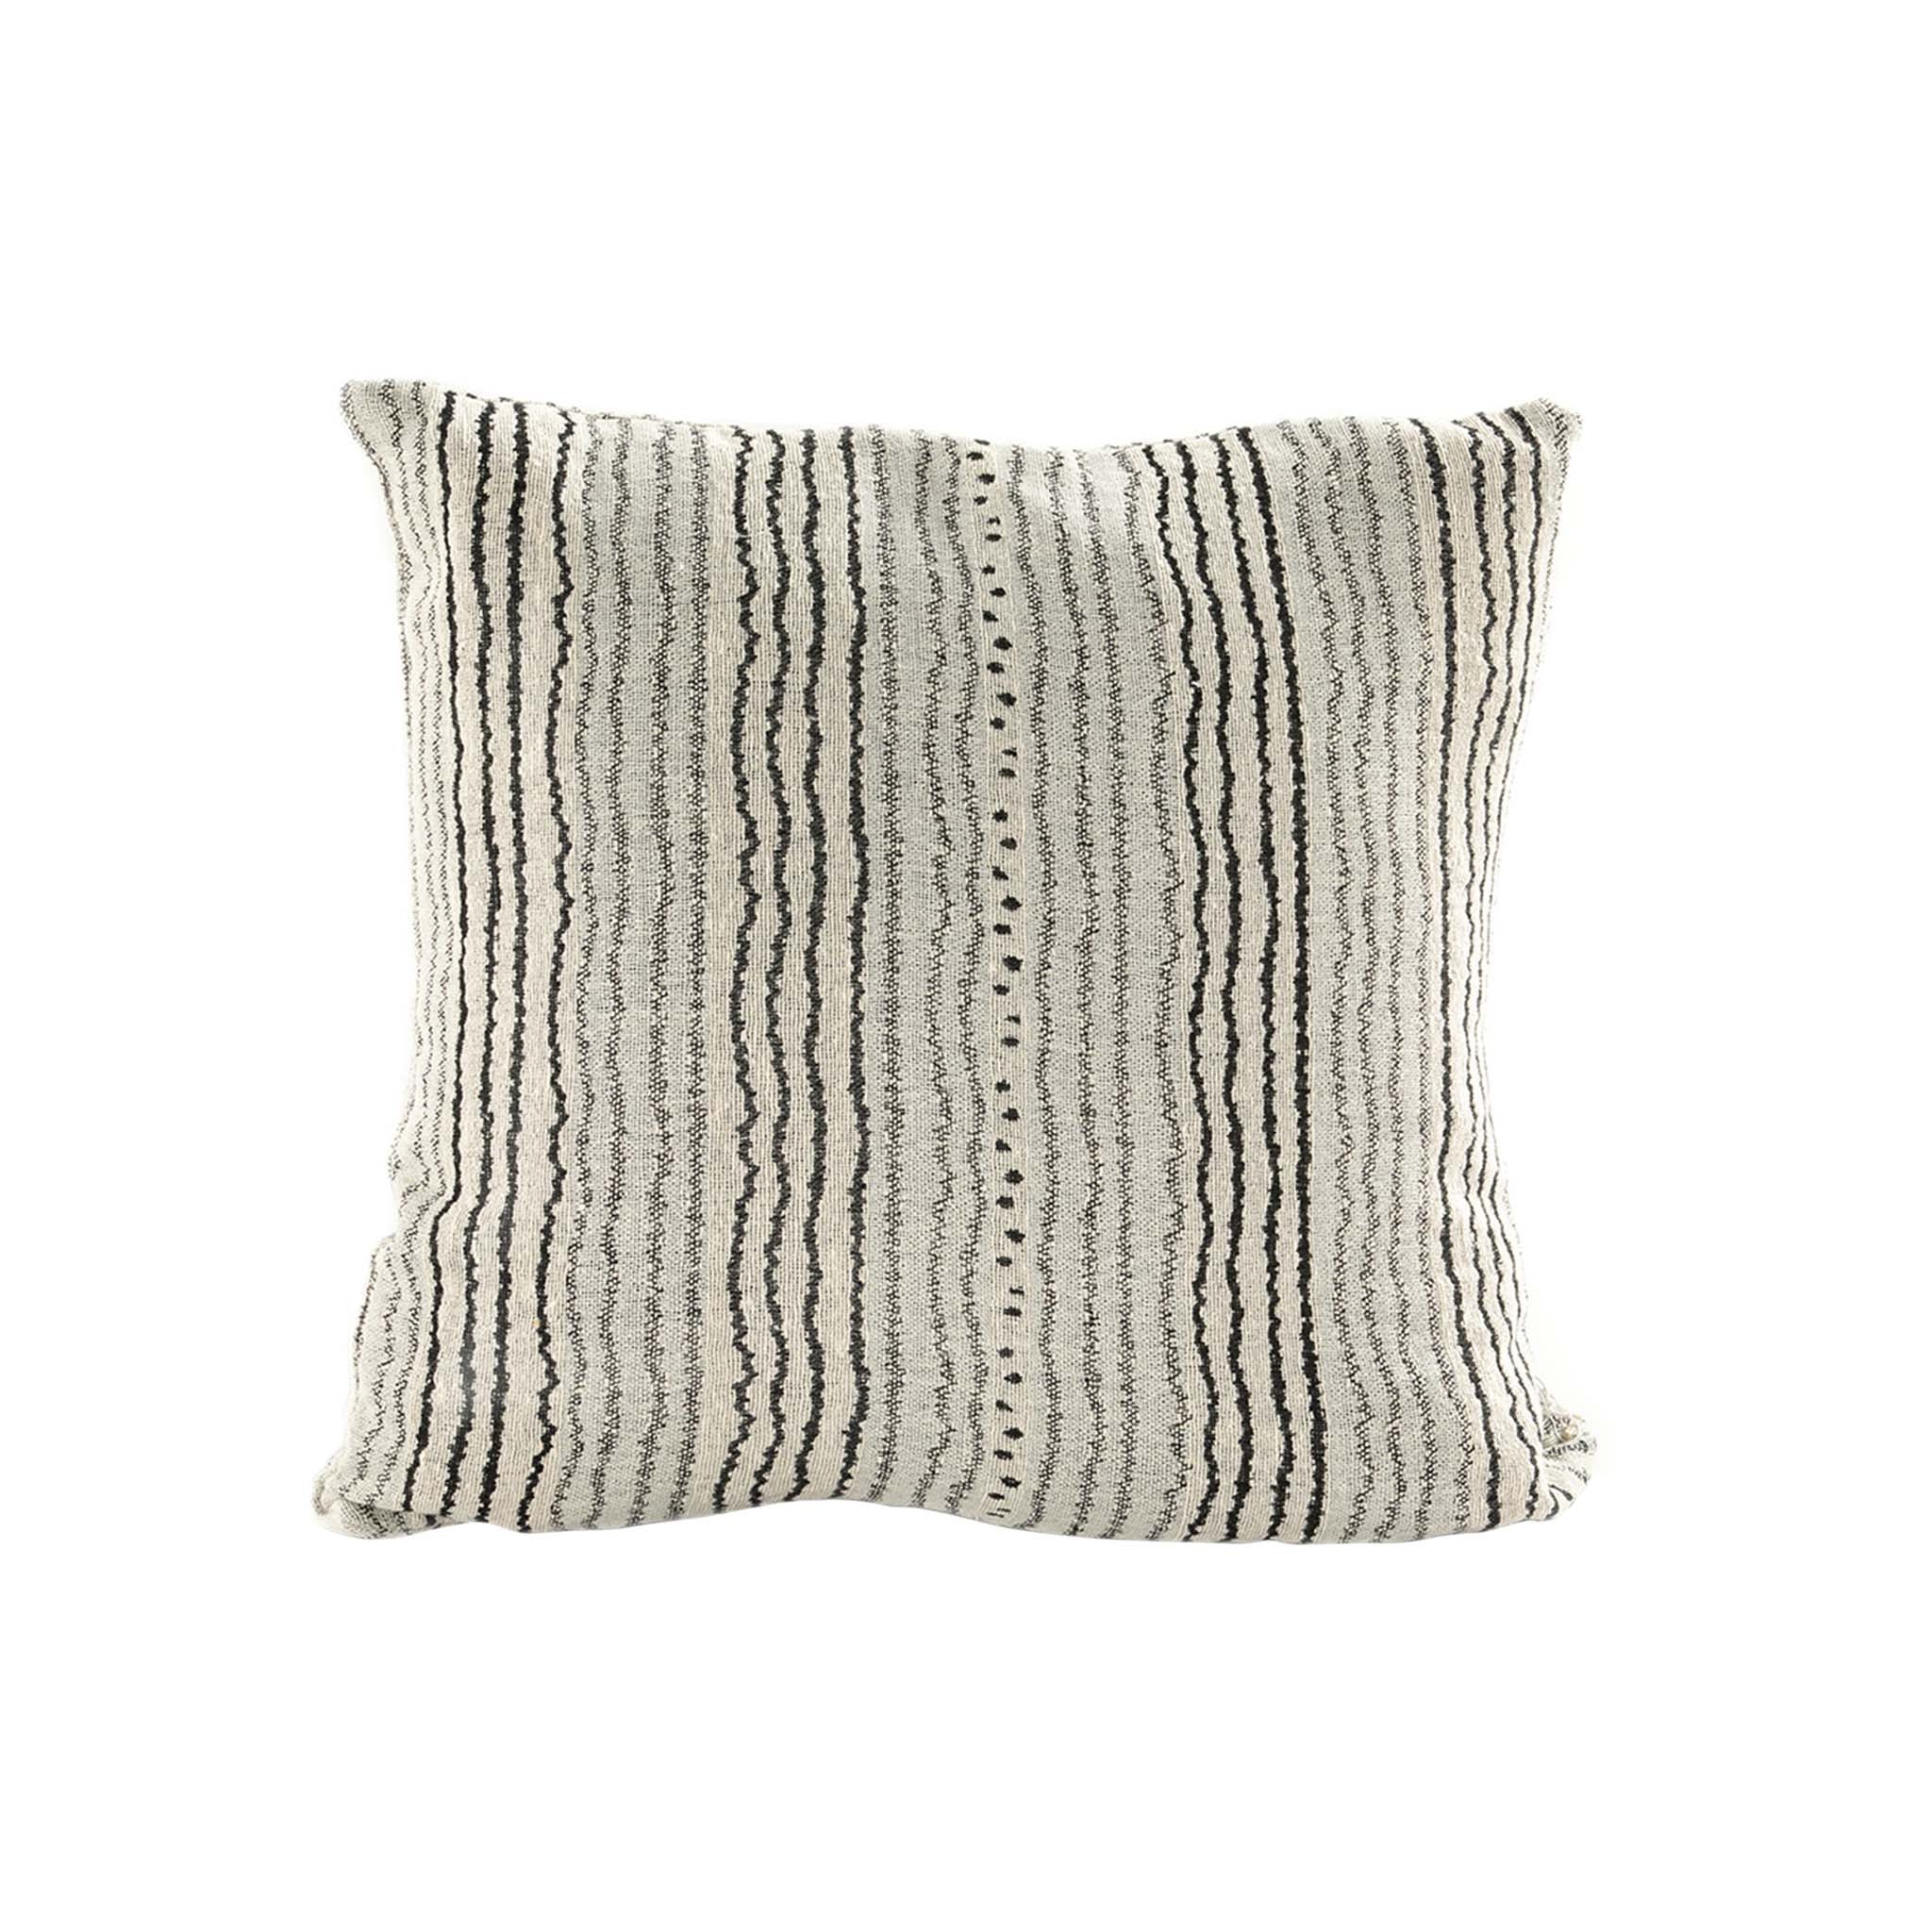 Oviedo Square Woven Pillow